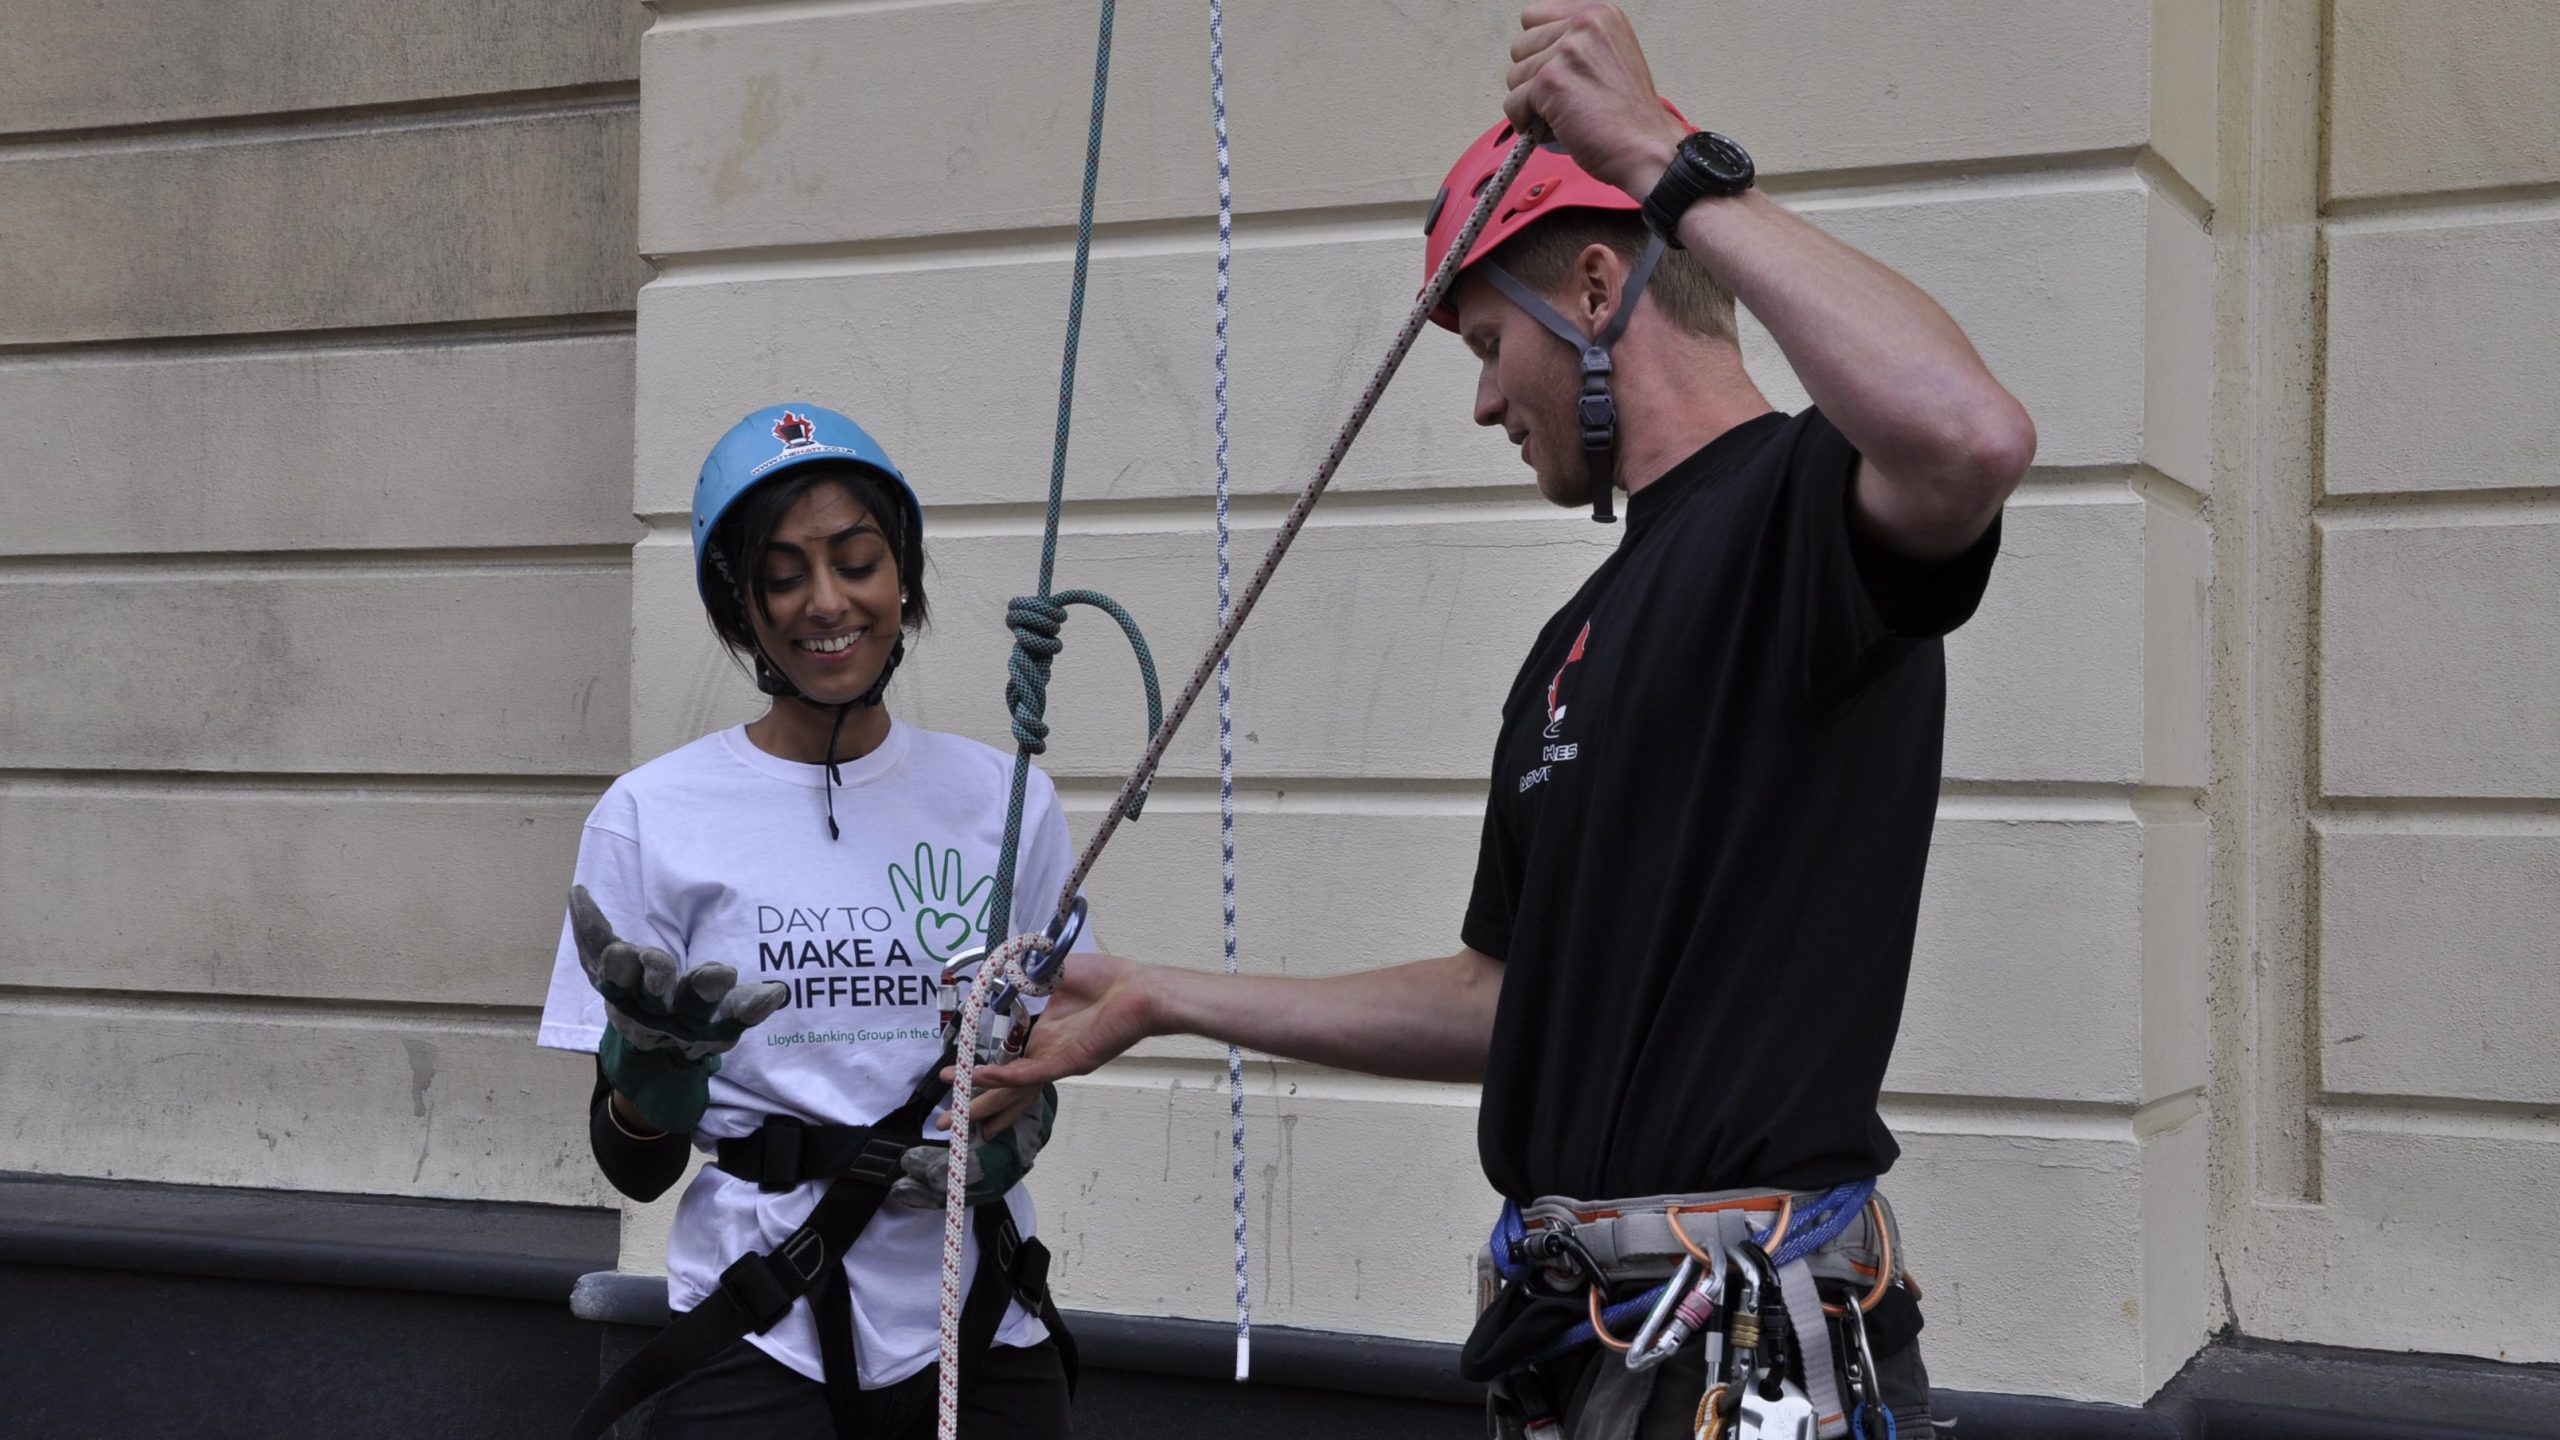 A woman wearing a harness being untied by Tom from her abseil rope.